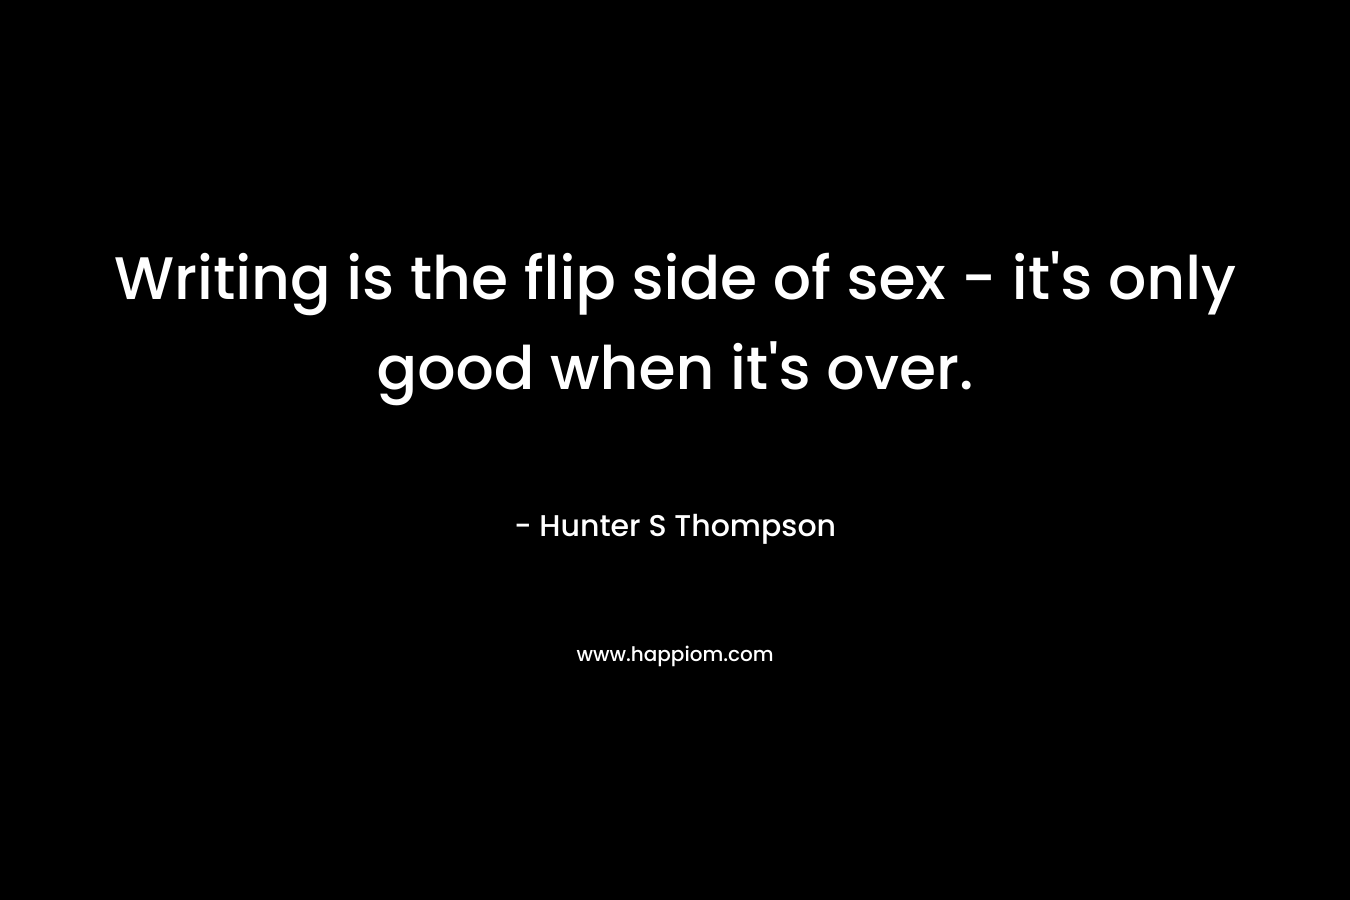 Writing is the flip side of sex - it's only good when it's over.